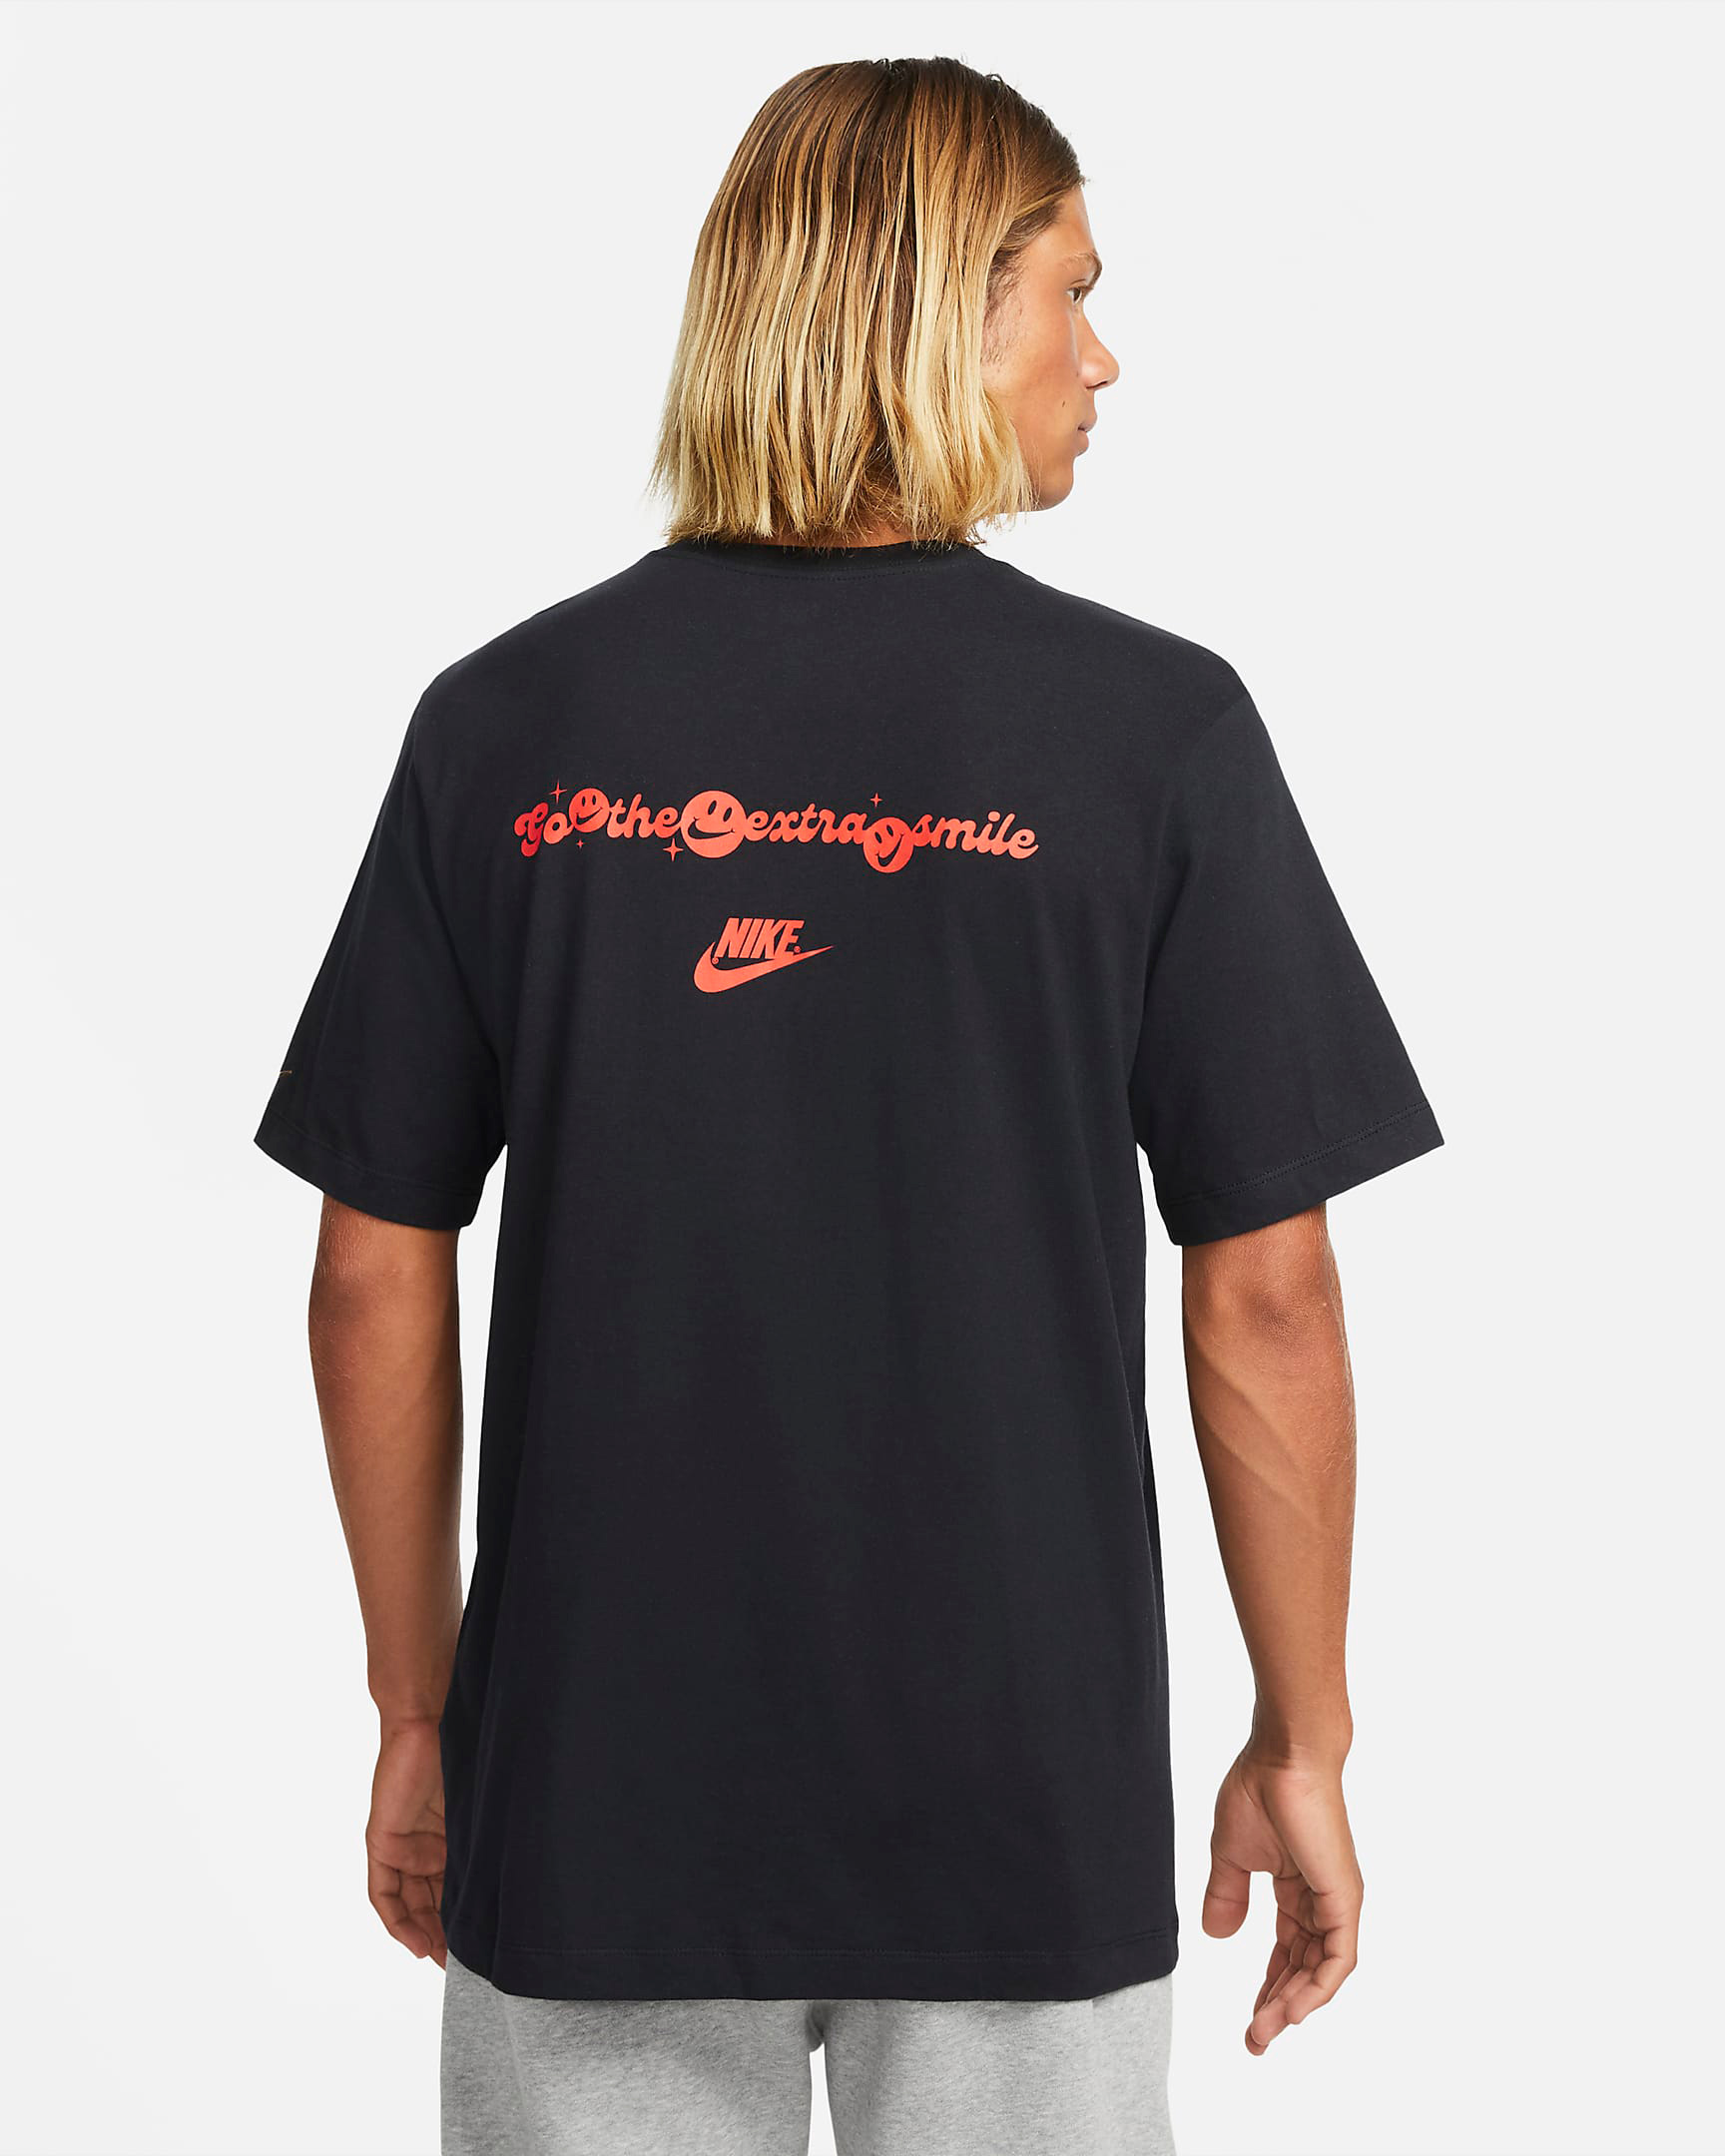 nike-go-the-extra-smile-shirt-black-red-2